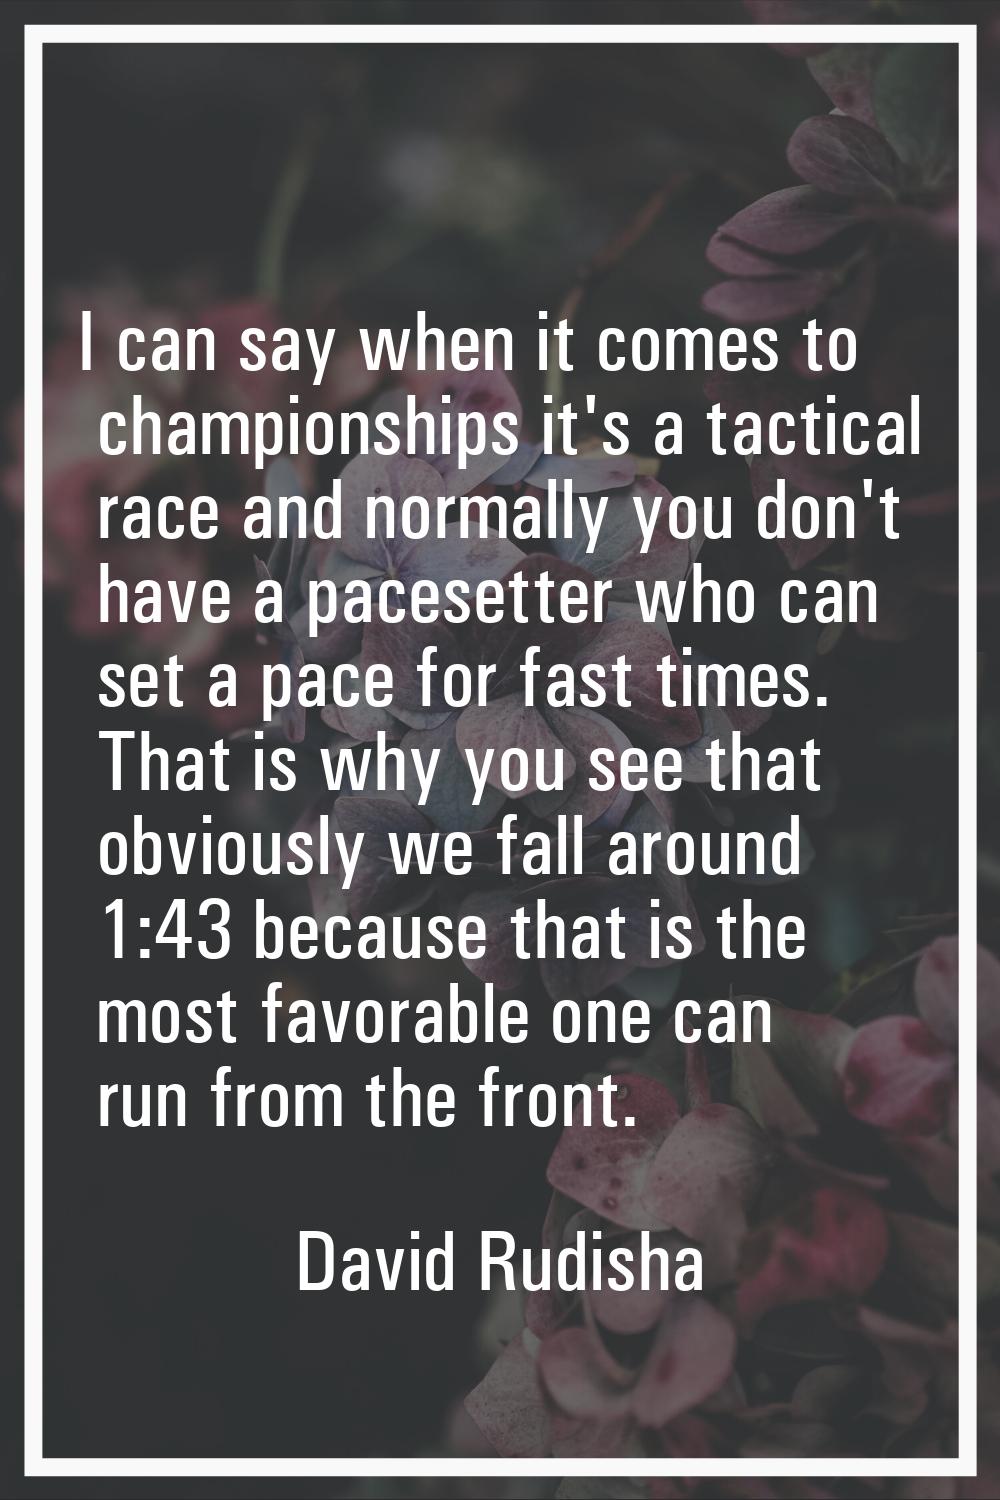 I can say when it comes to championships it's a tactical race and normally you don't have a paceset